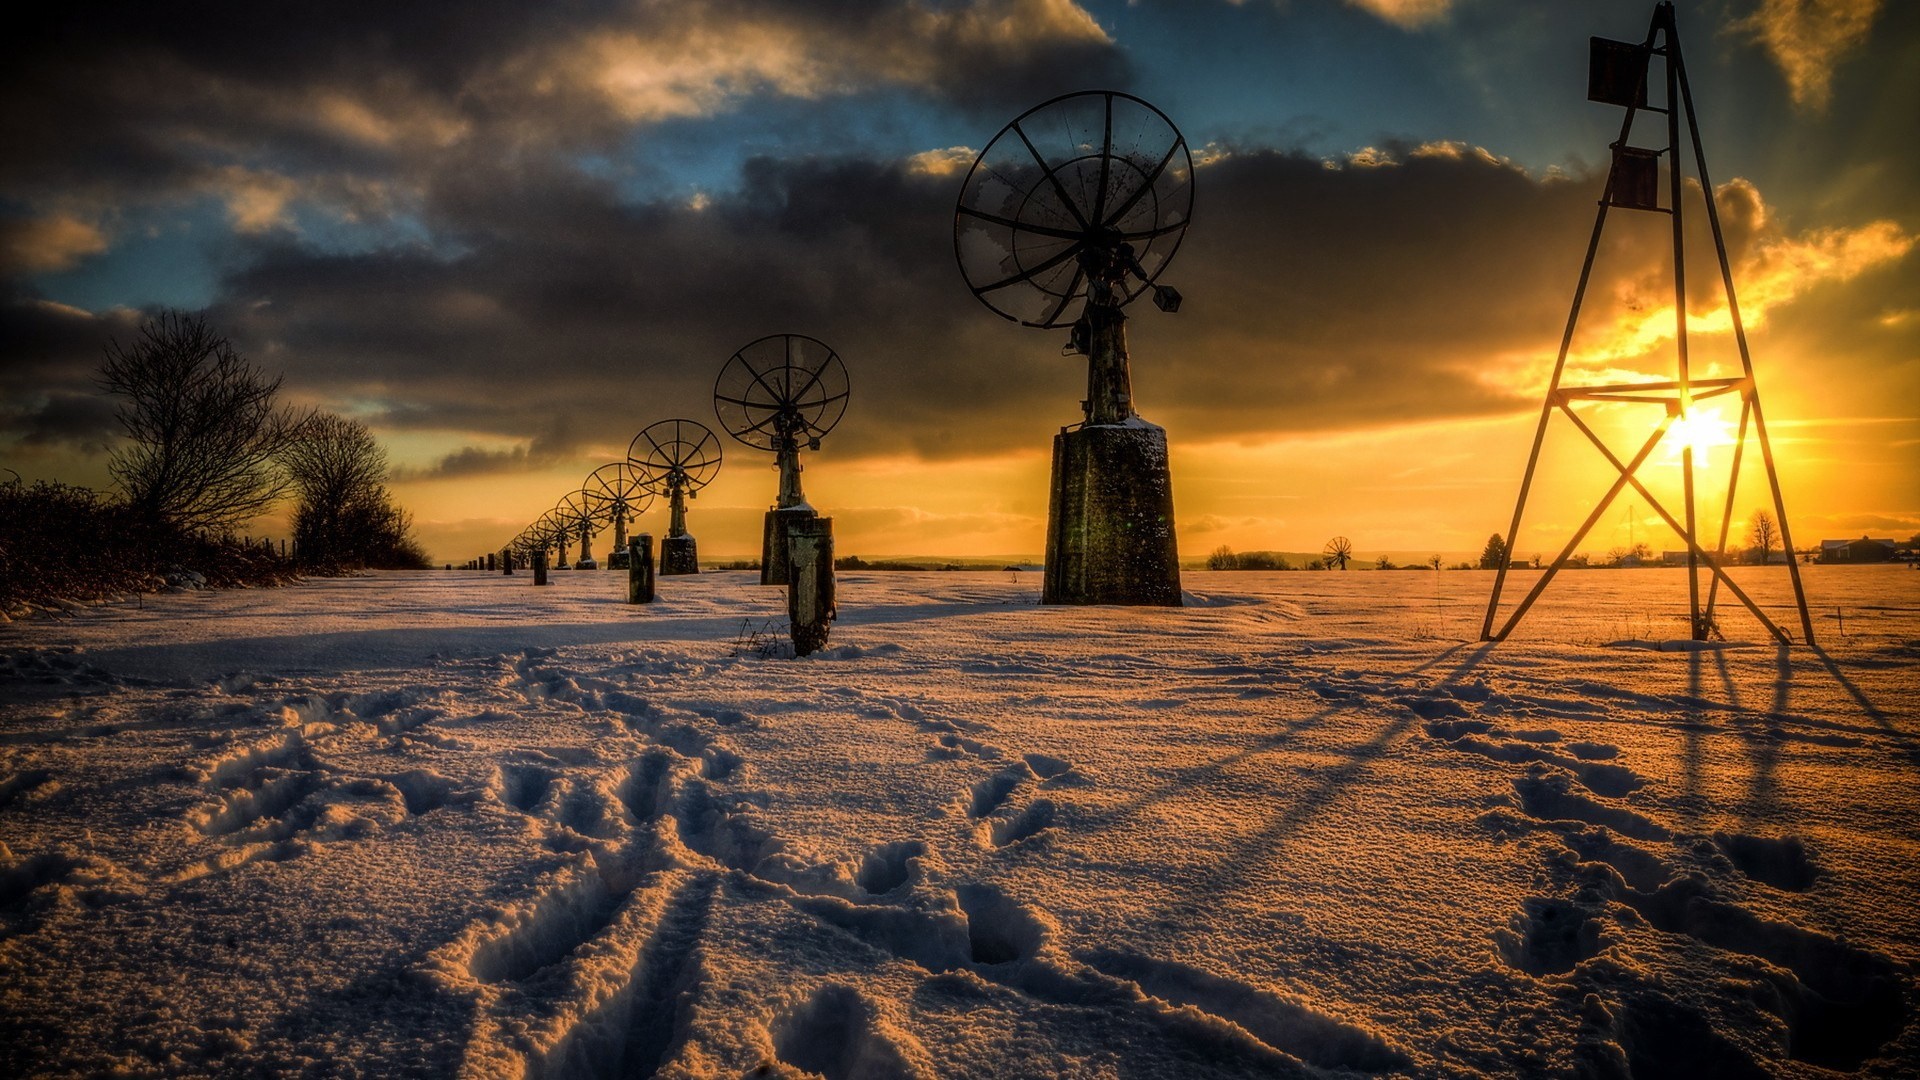 General 1920x1080 nature landscape antenna clouds satellite technology HDR winter snow trees sun rays